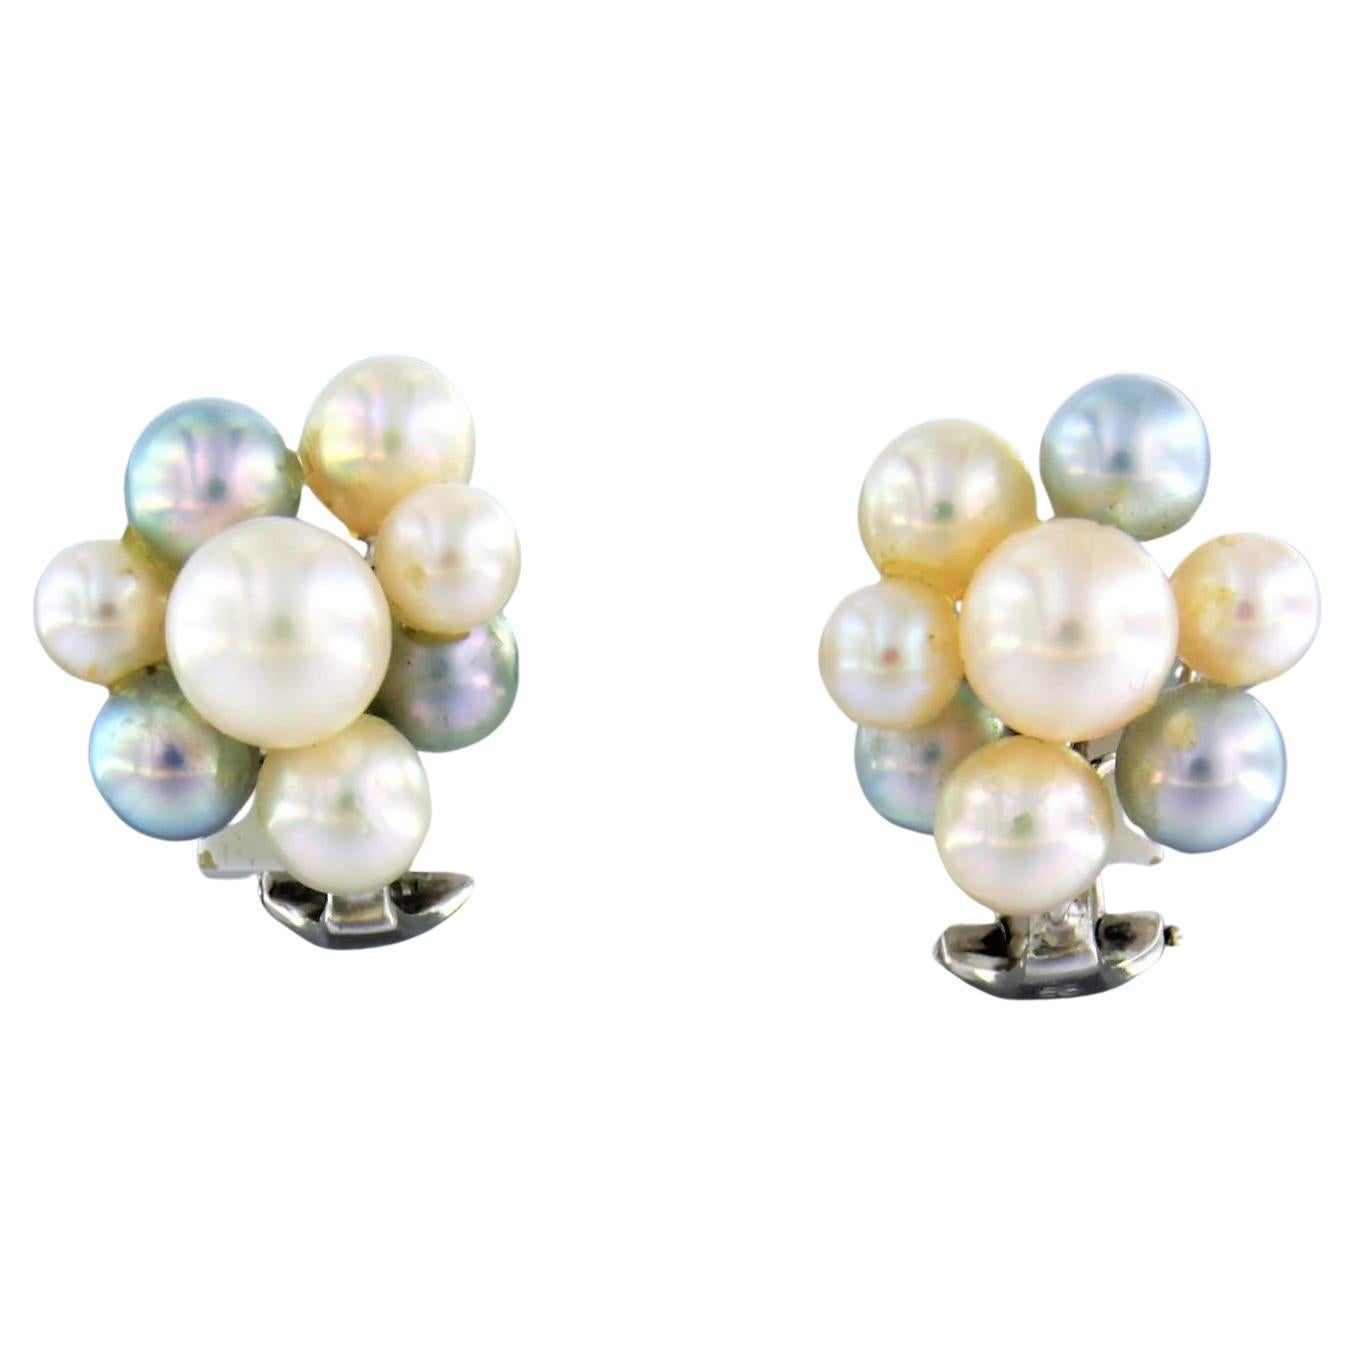 Earrings set with pearls 18k white gold